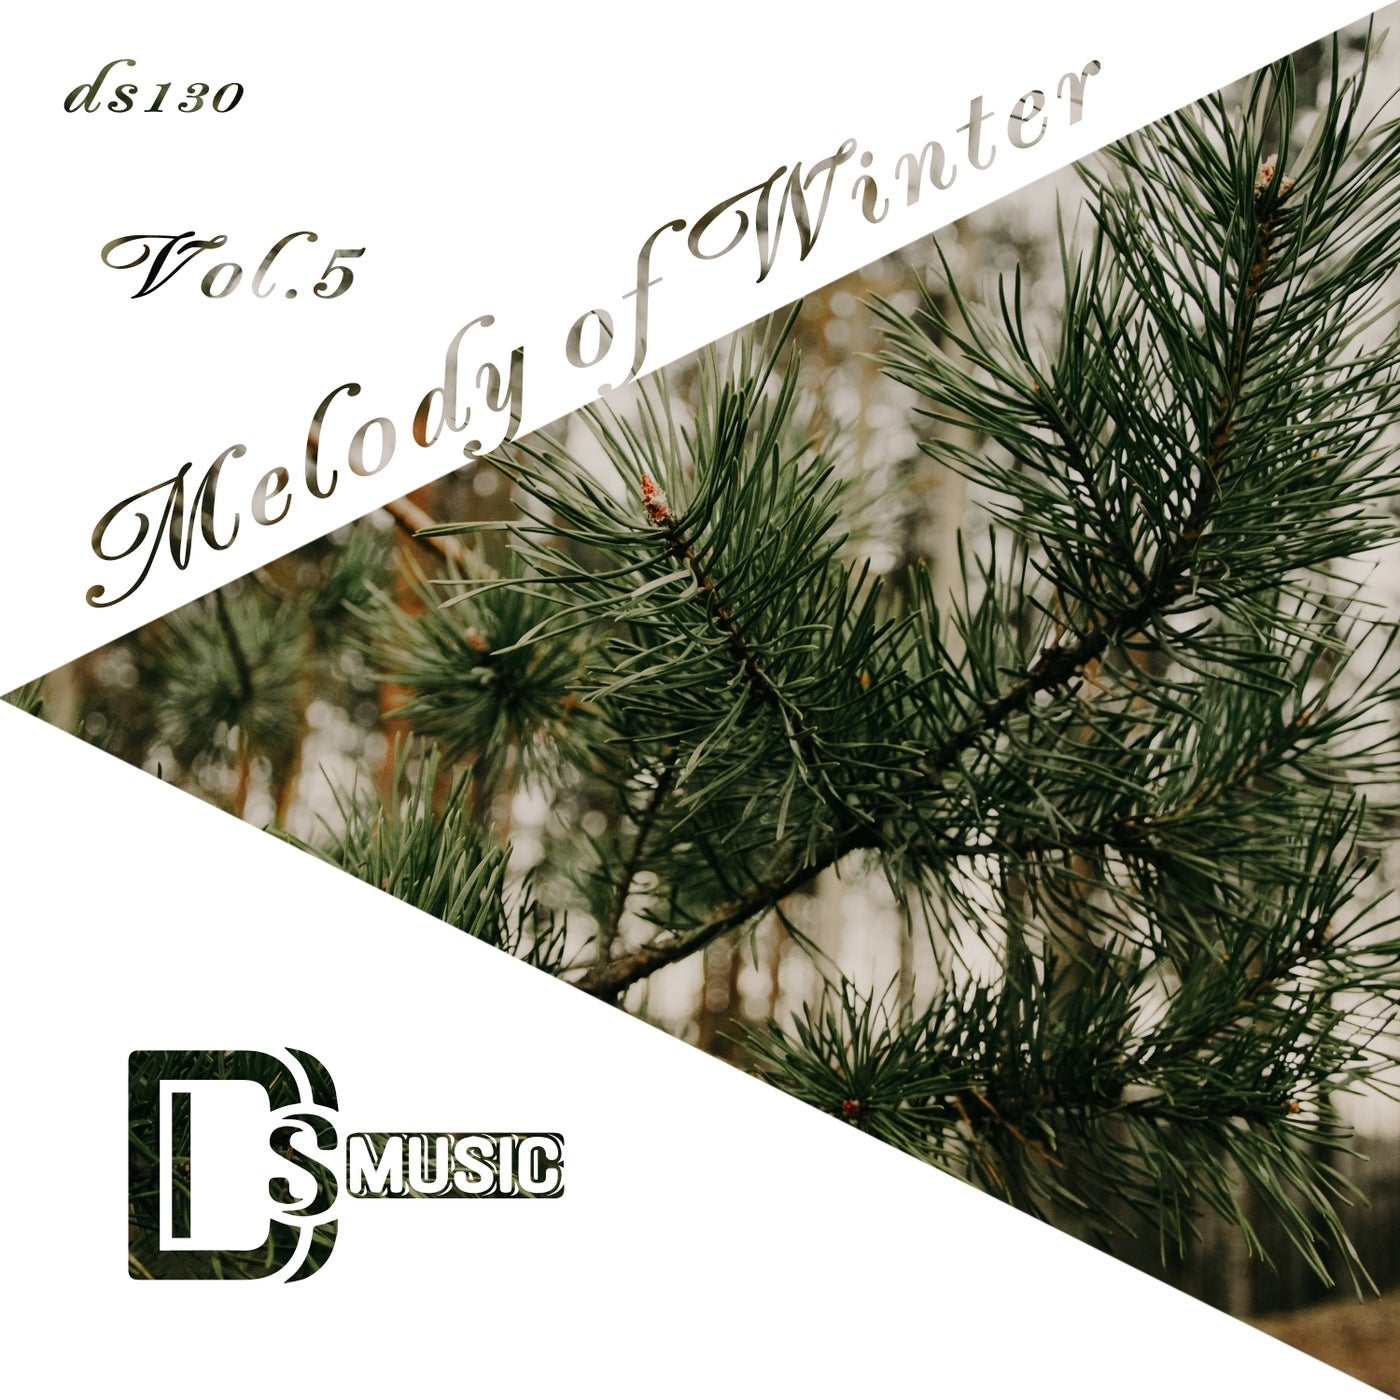 Melody of Winter, Vol. 5